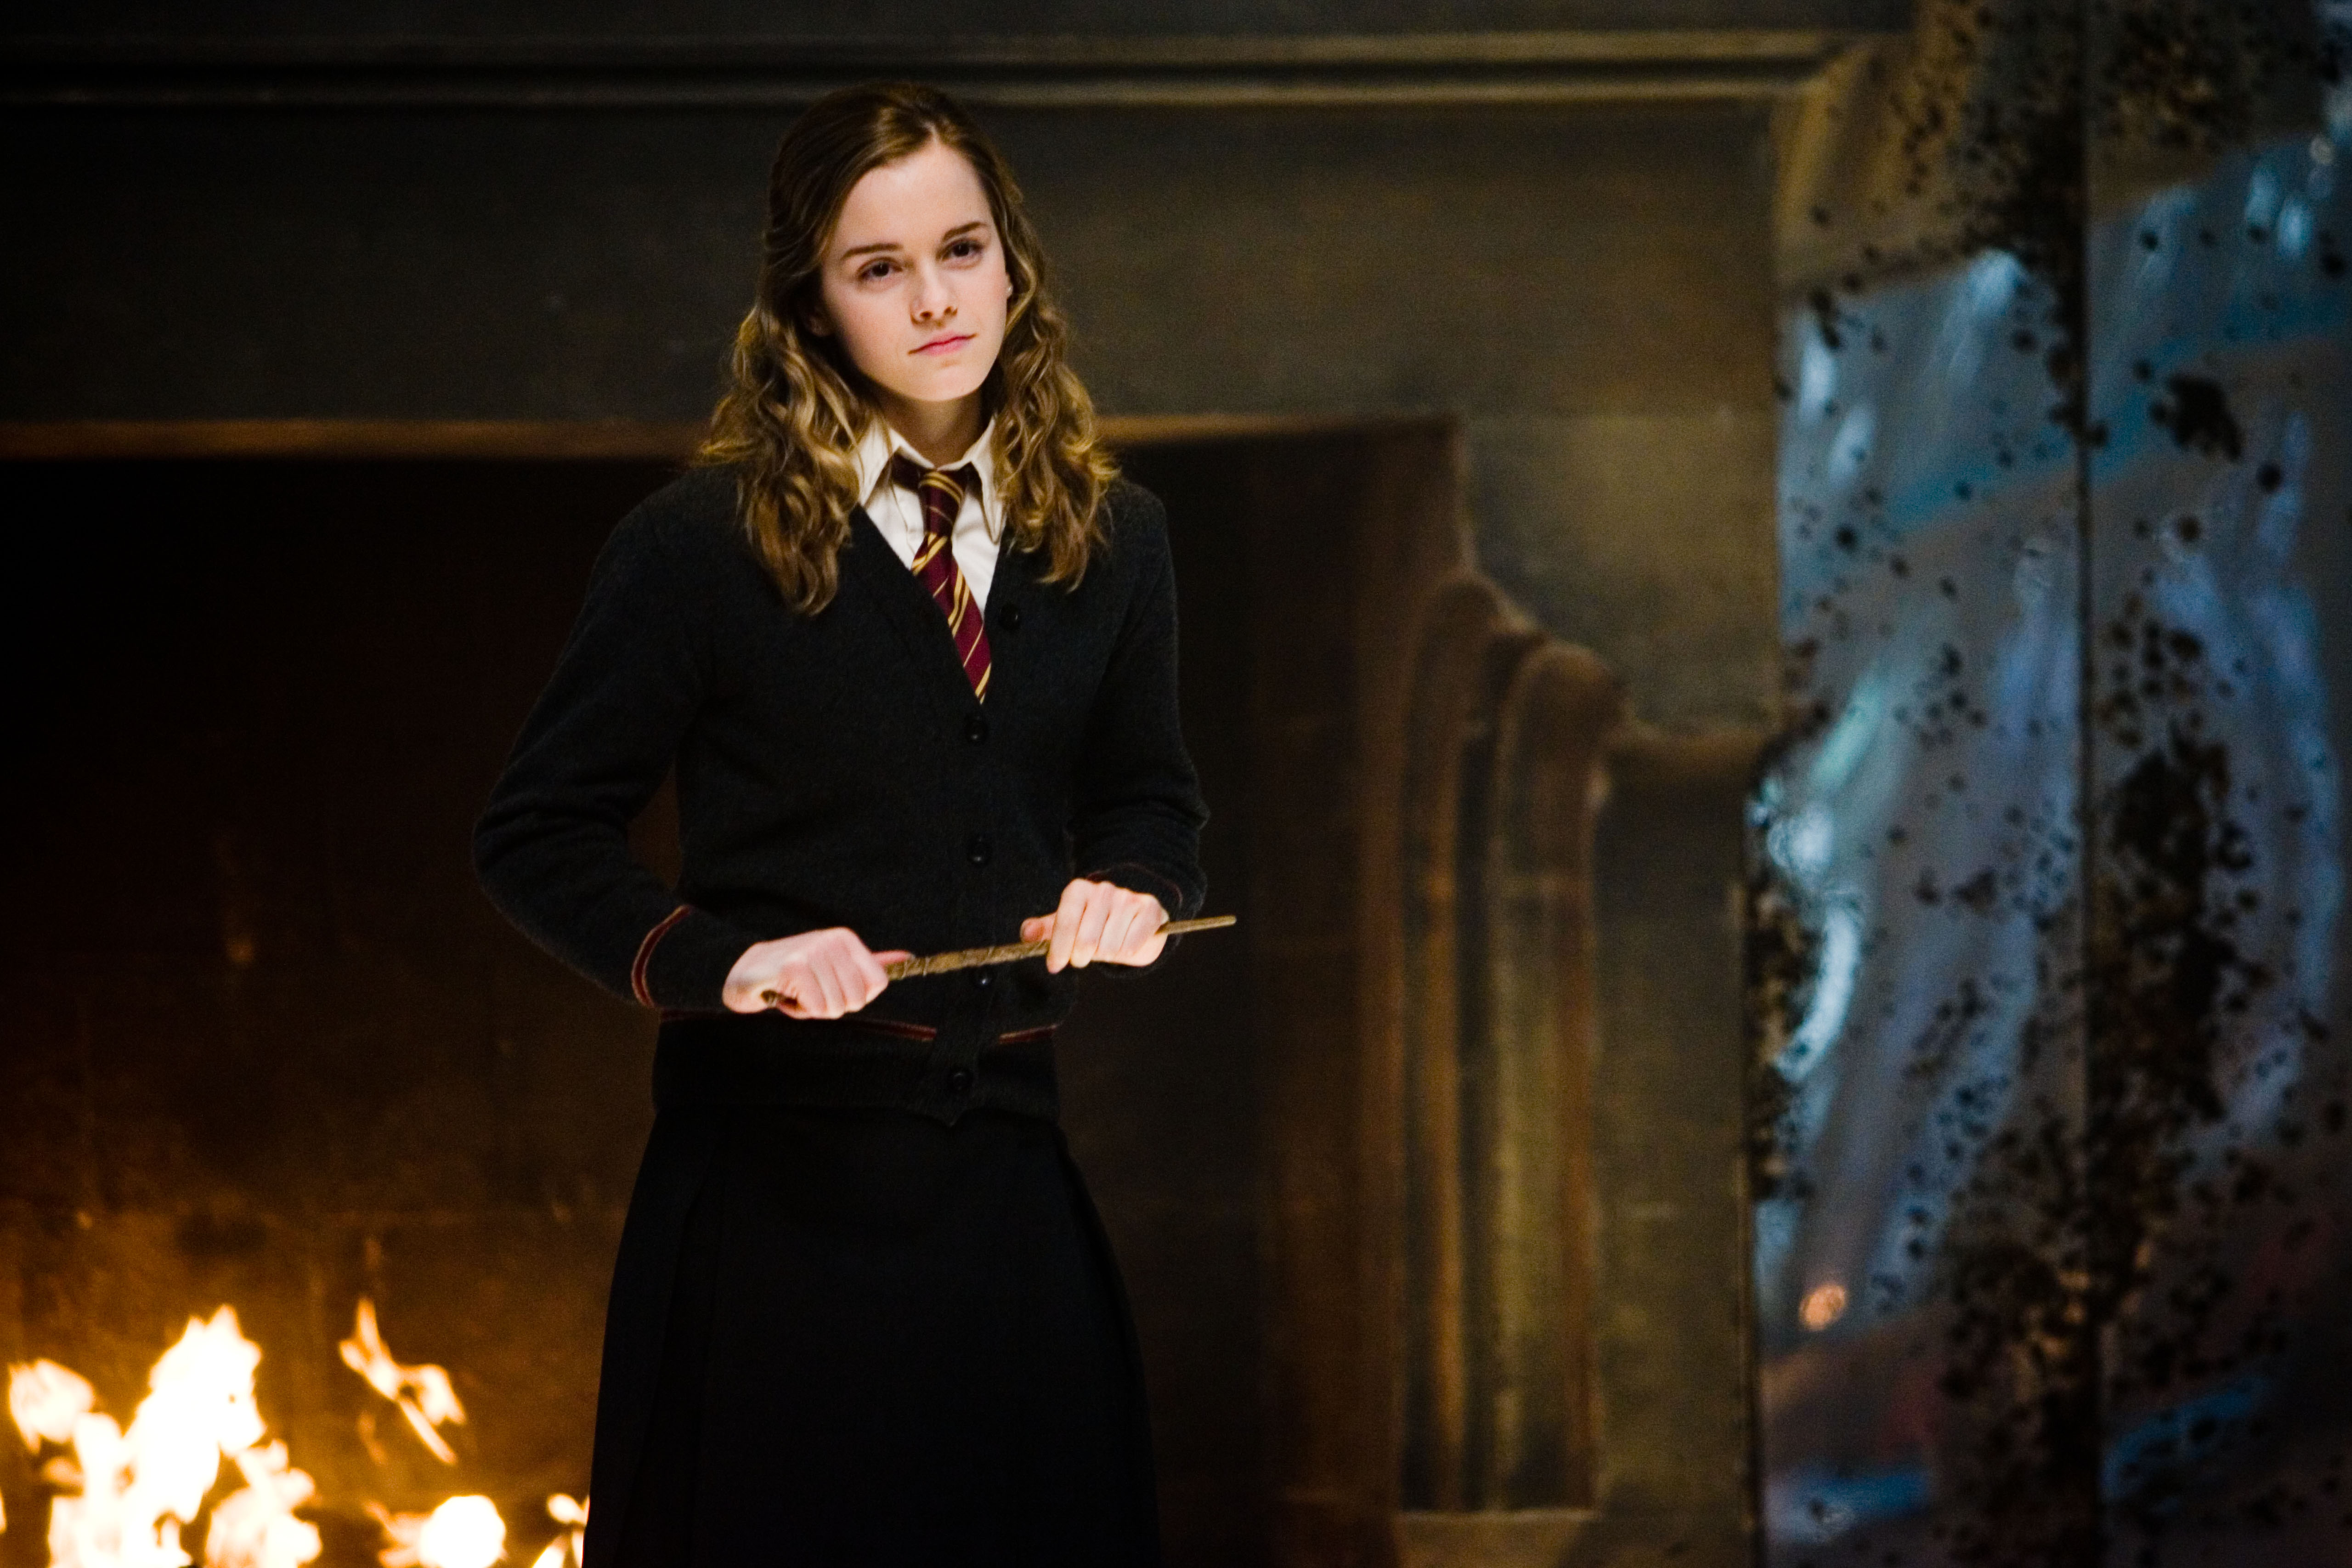 images of hermione in harry potter